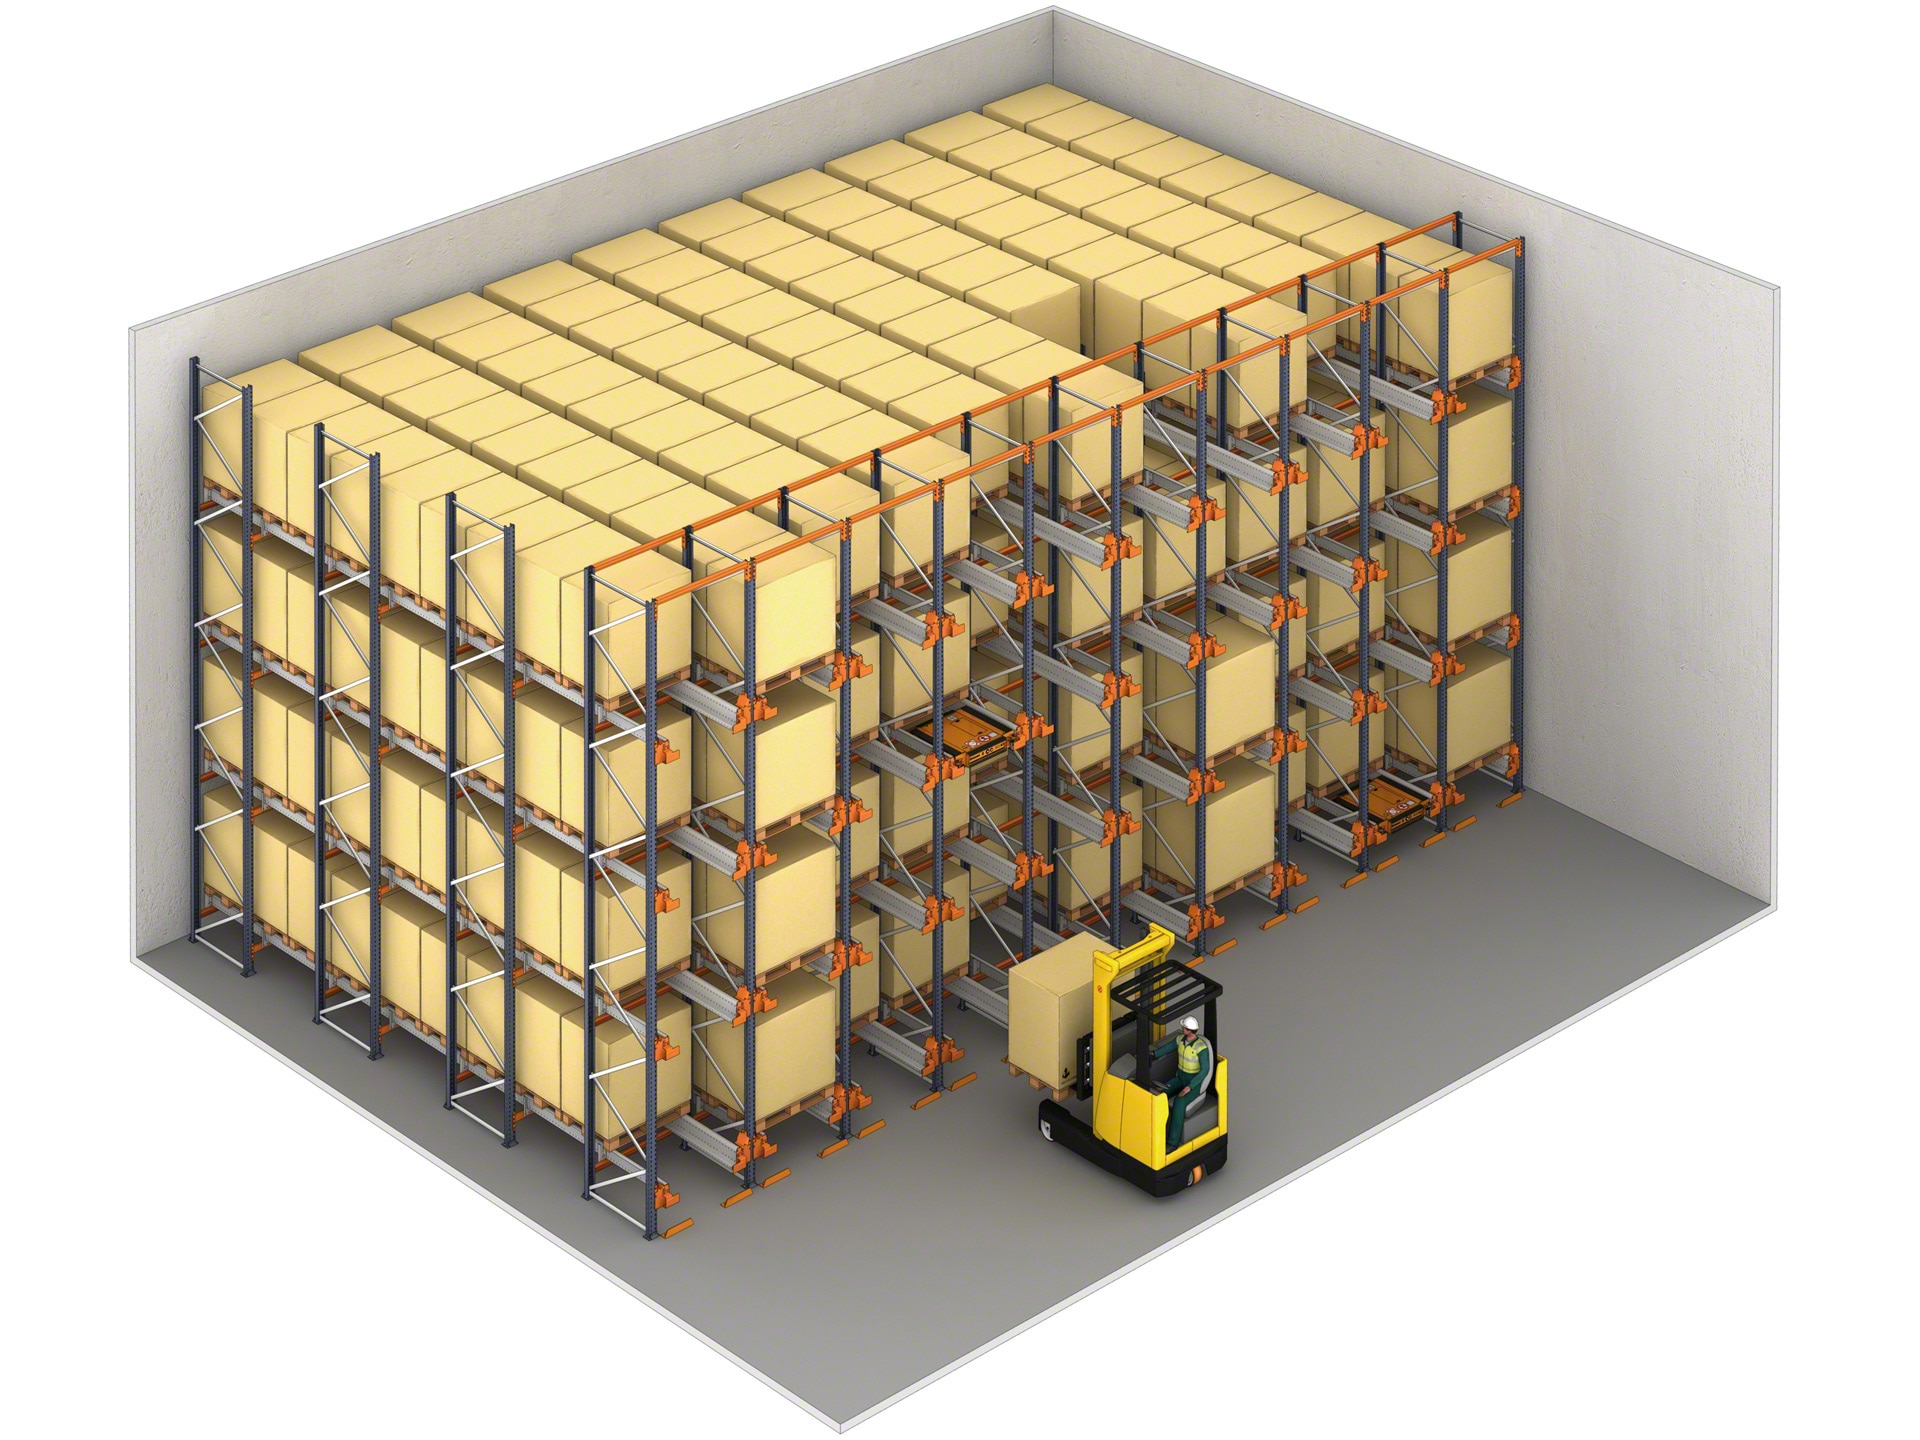 With just one order, the Pallet Shuttle can fill an entire storage channel